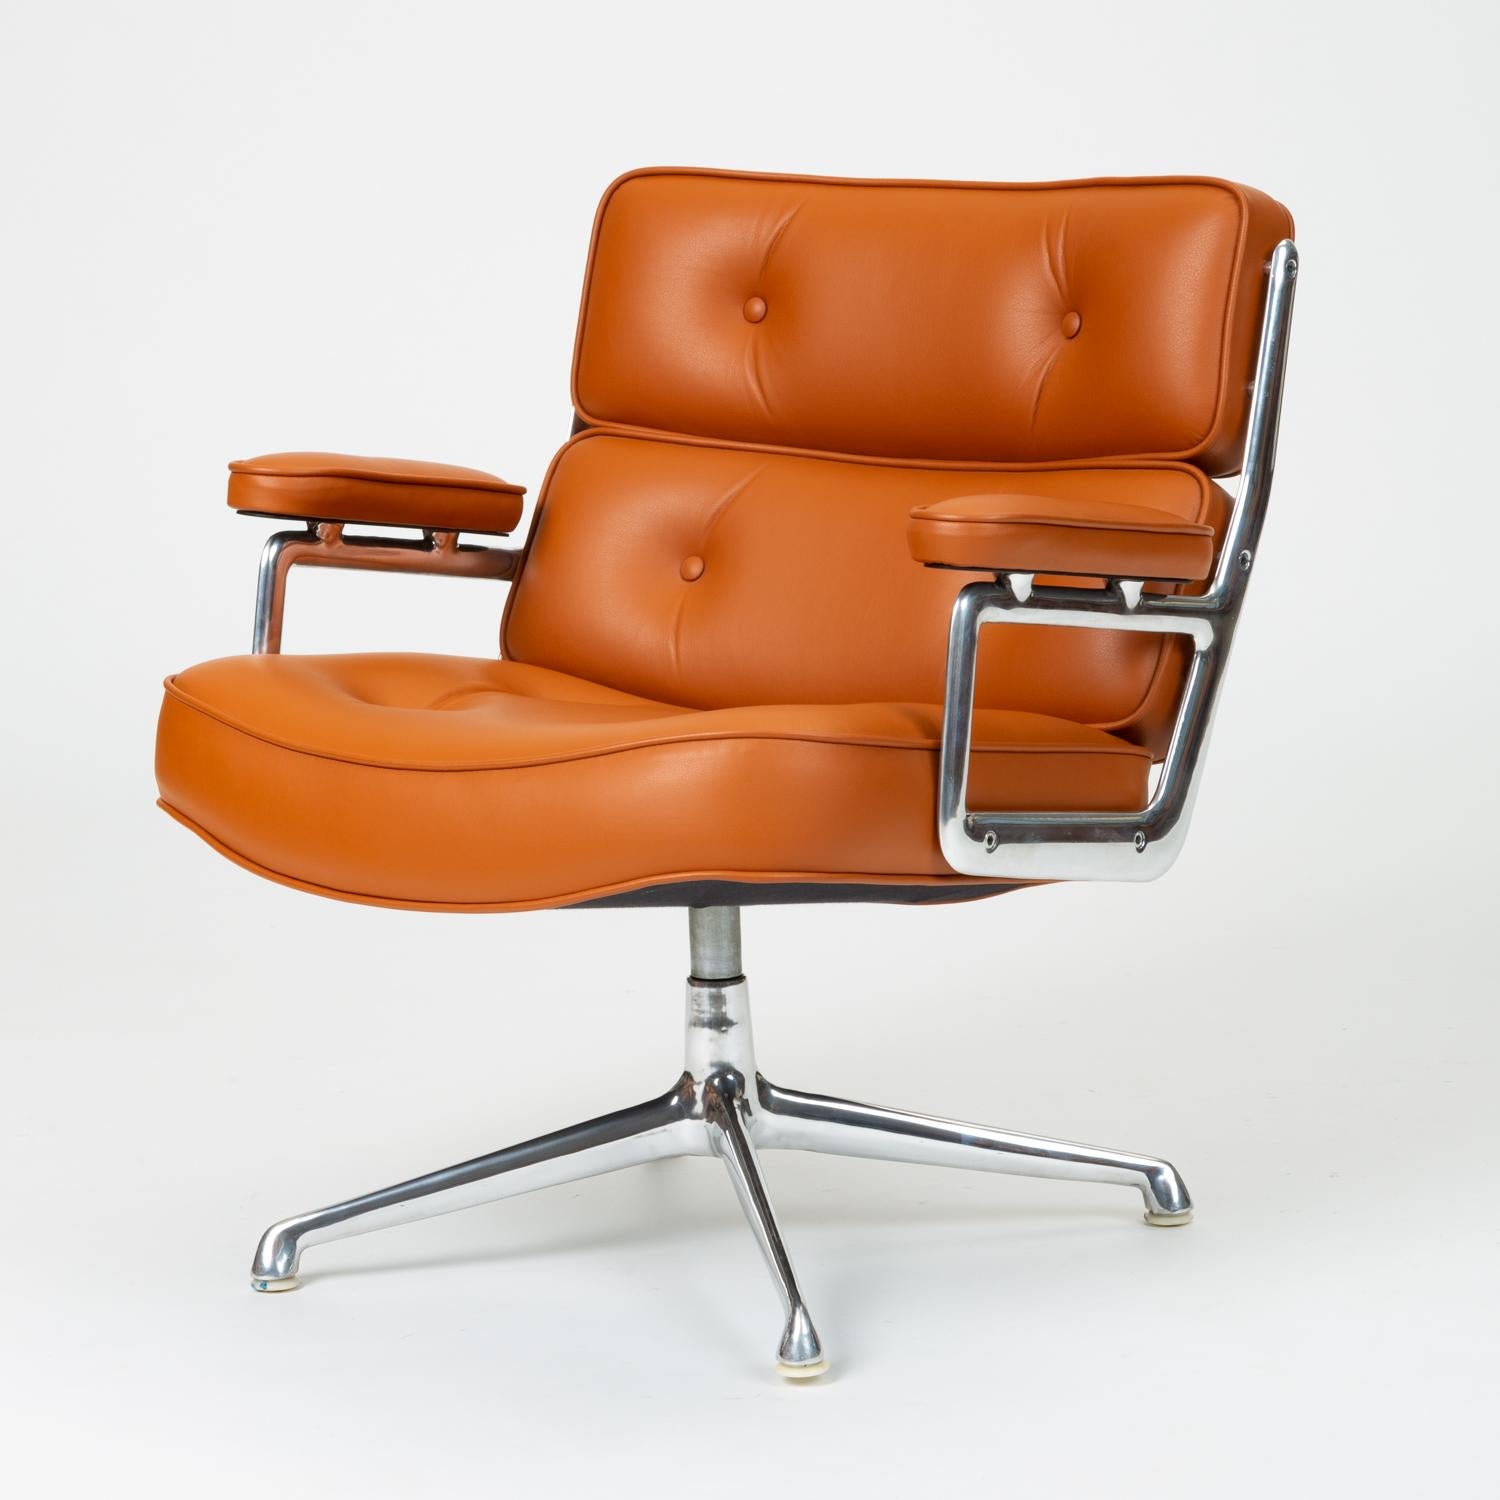 A legendary office design by Ray and Charles Eames for the three modernist lobbies of the new Time Life Building in Manhattan, the Time Life Lobby chair has a polished aluminum frame and segmented, tufted cushions in leather upholstery. Leather